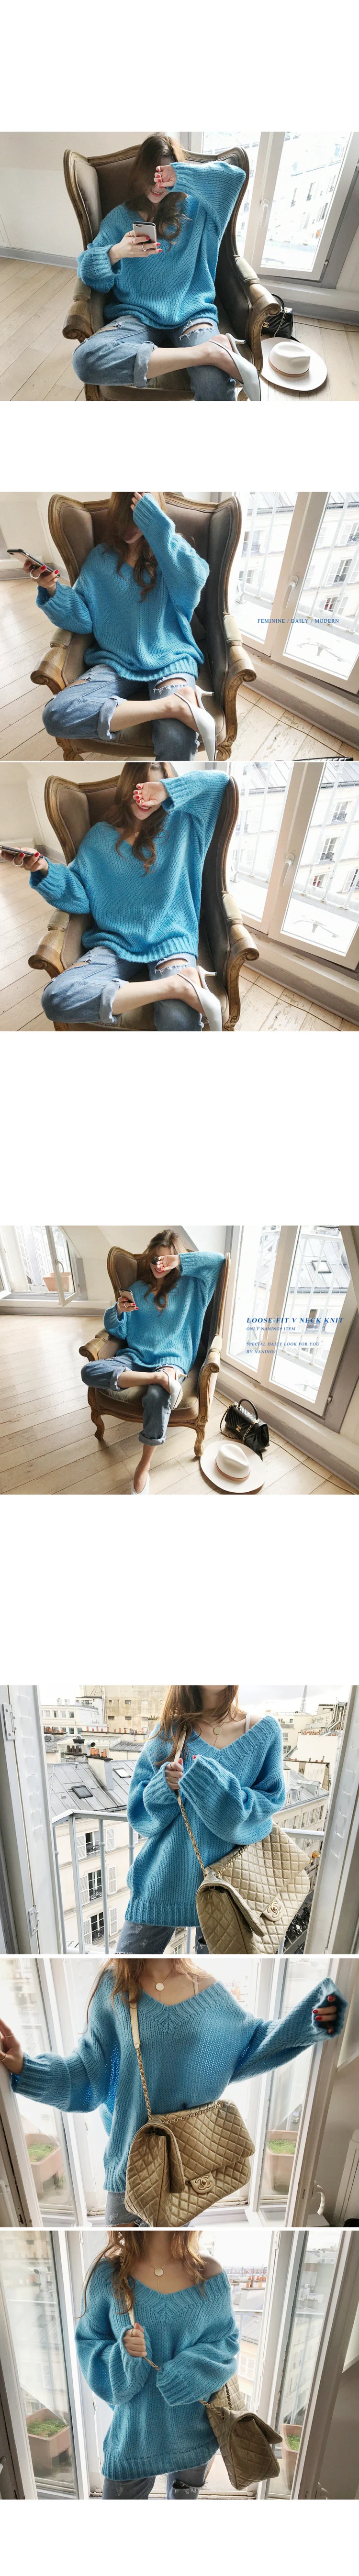 3 Colors Ivory & Green & Blue Mohair Knitting Jumper Autumn Korean Hollow Out V-neck Pullover Sweater For Women C9N518B